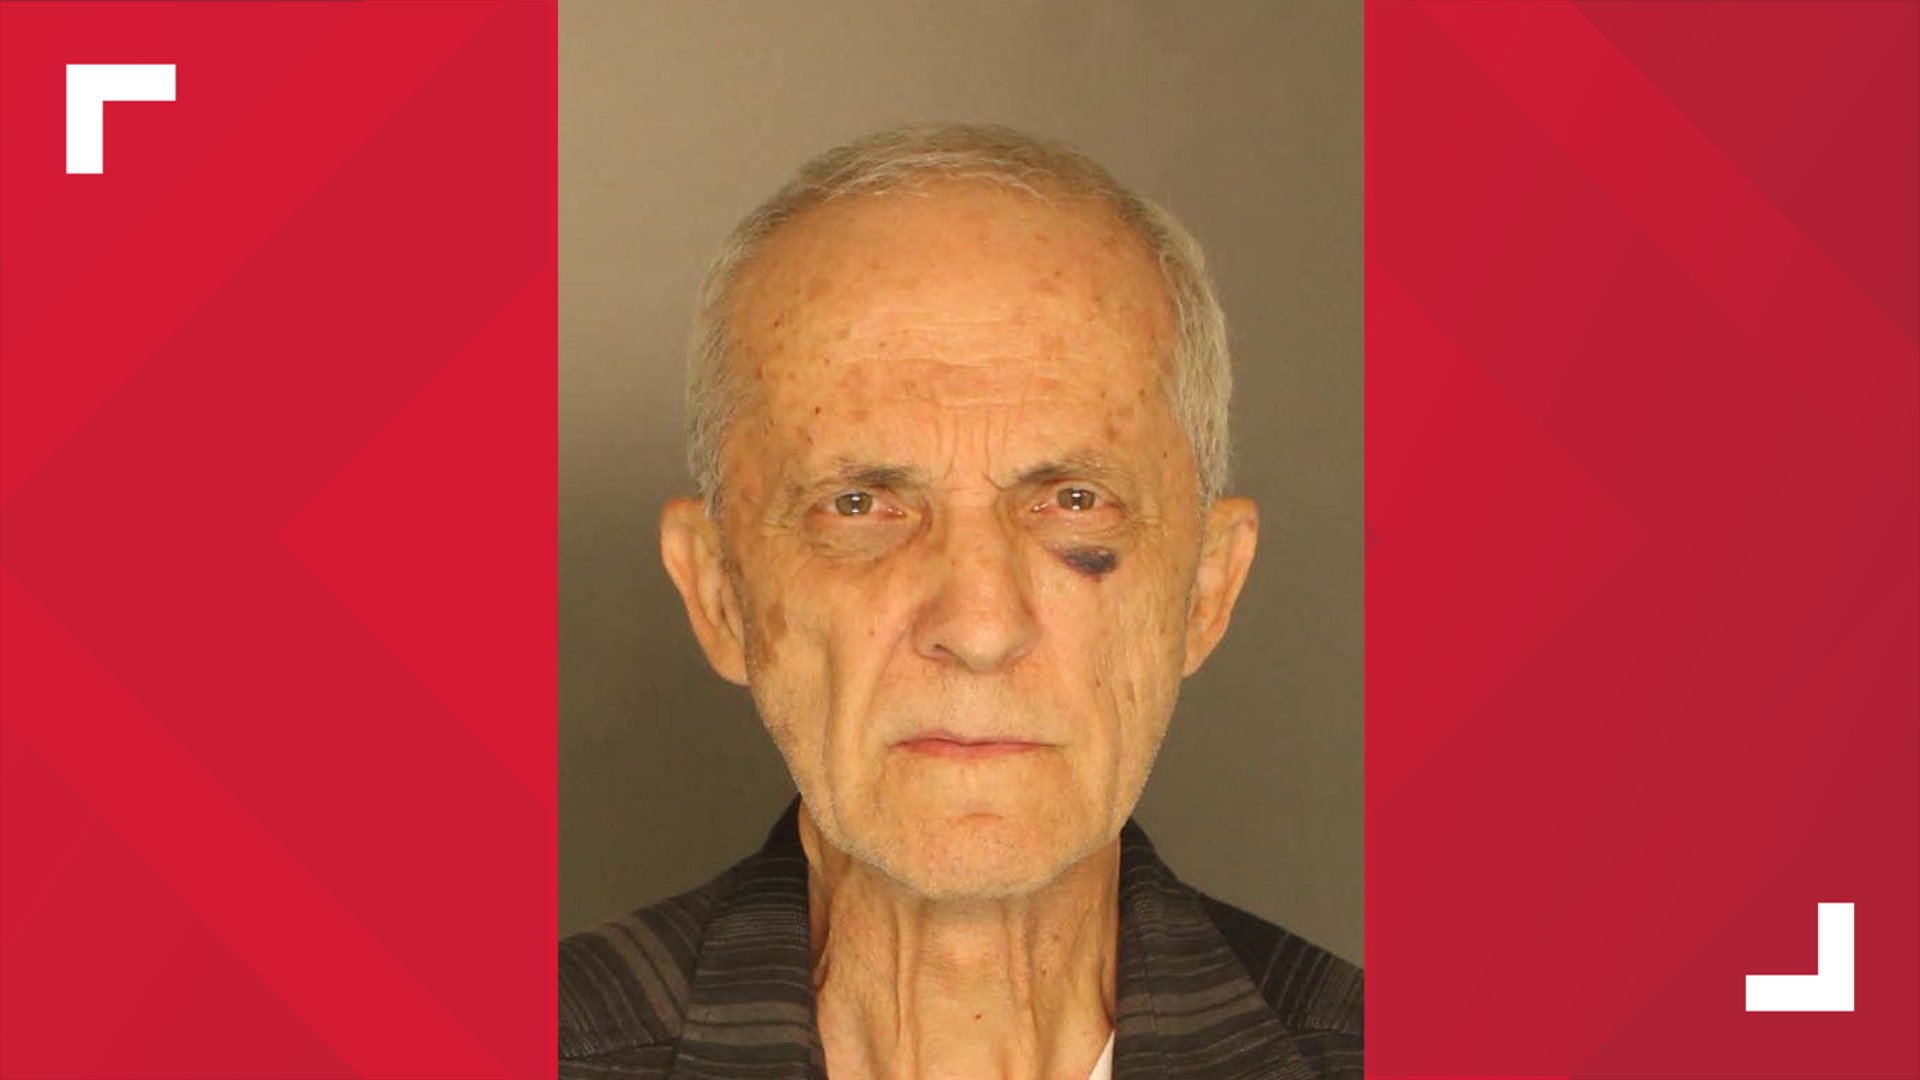 Ronald Kachinski, 76, of Seven Valleys, was charged this morning after calling 911 to report he had killed his wife, Sandra Anderson, according to State Police.